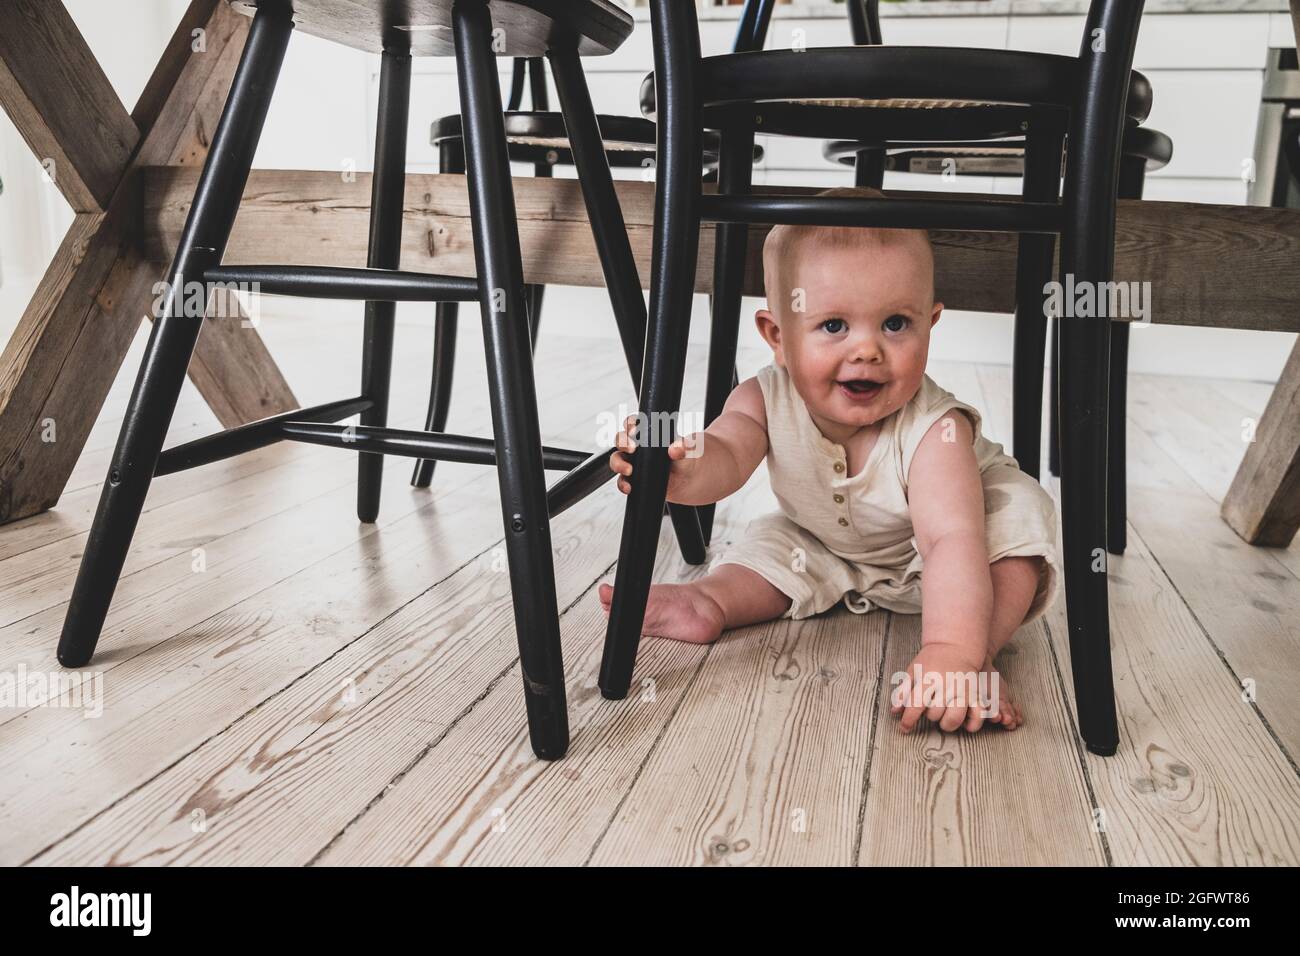 Smiling baby sitting under chair Stock Photo